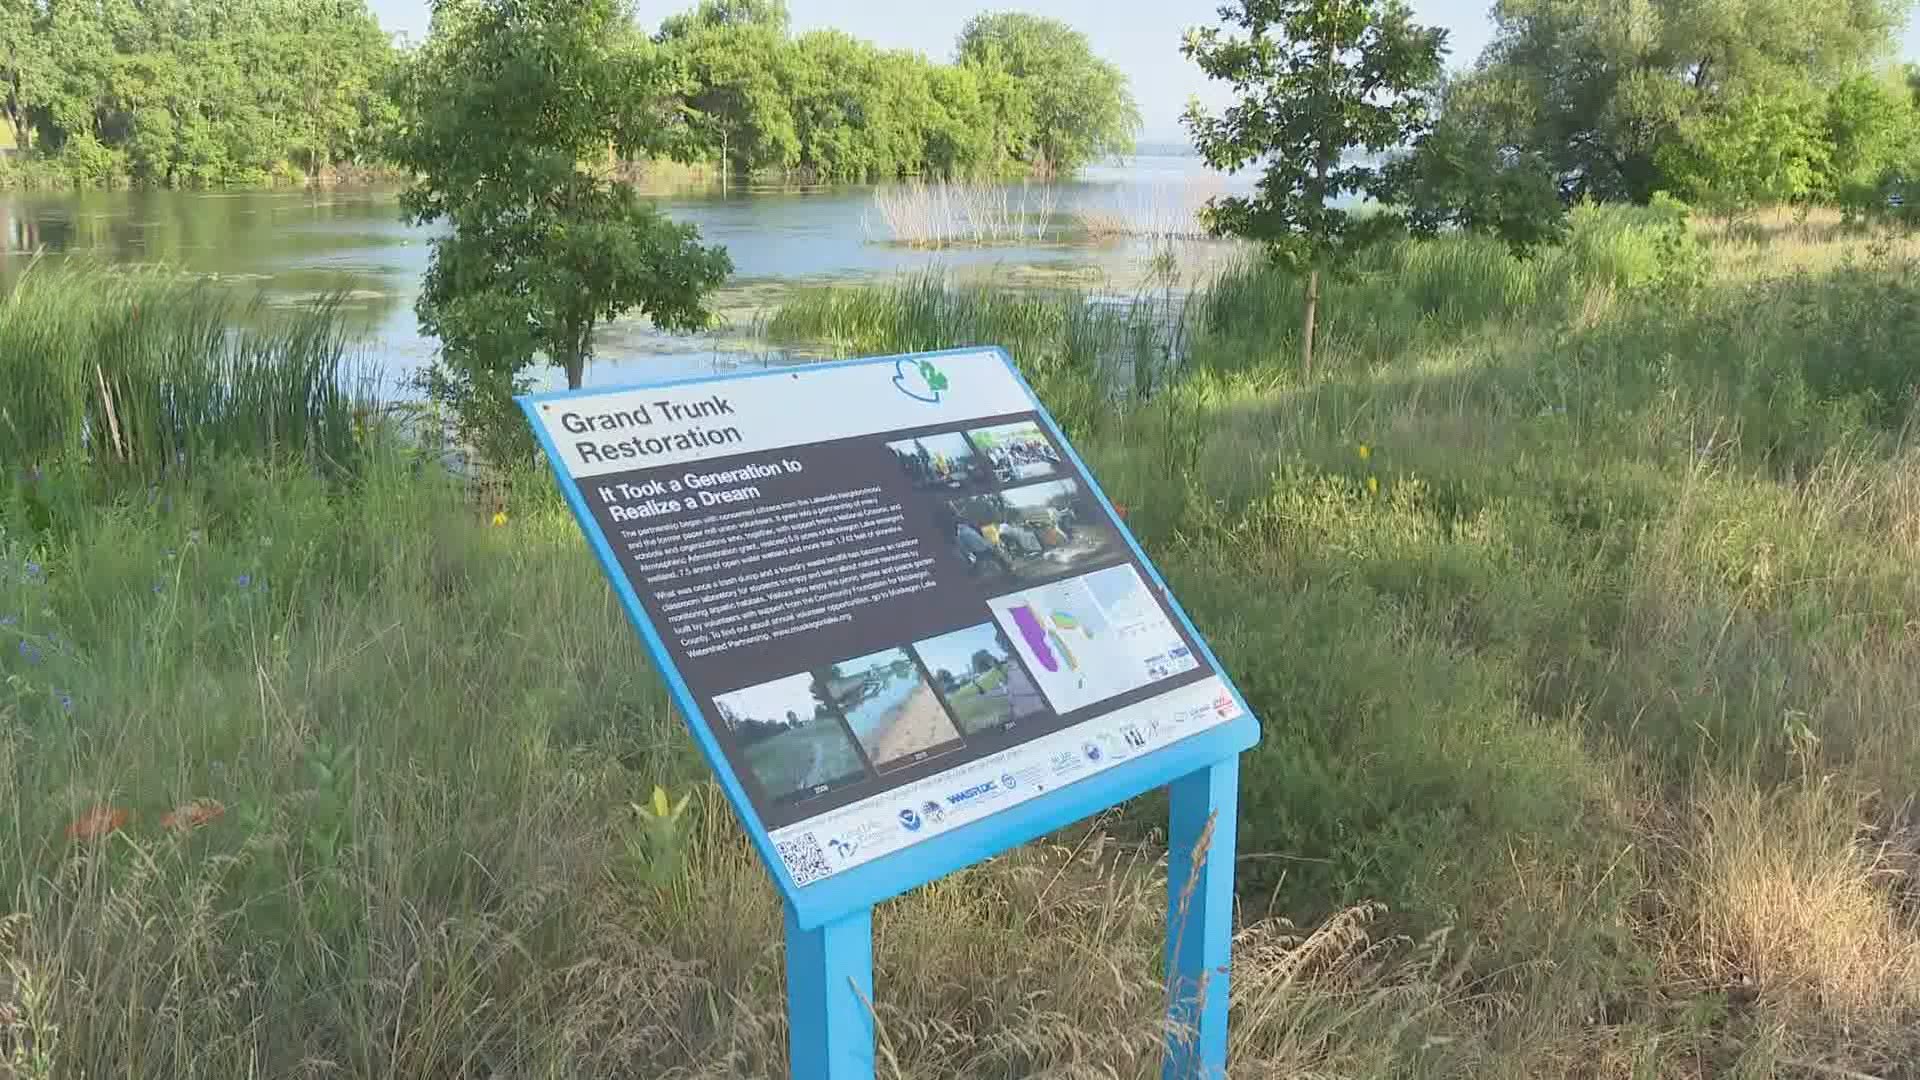 Open Water Marathon Swimmer Michelle Rogalski completed a 10-mile swim in Muskegon Lake Wednesday to tour completed restoration sites along the shoreline.